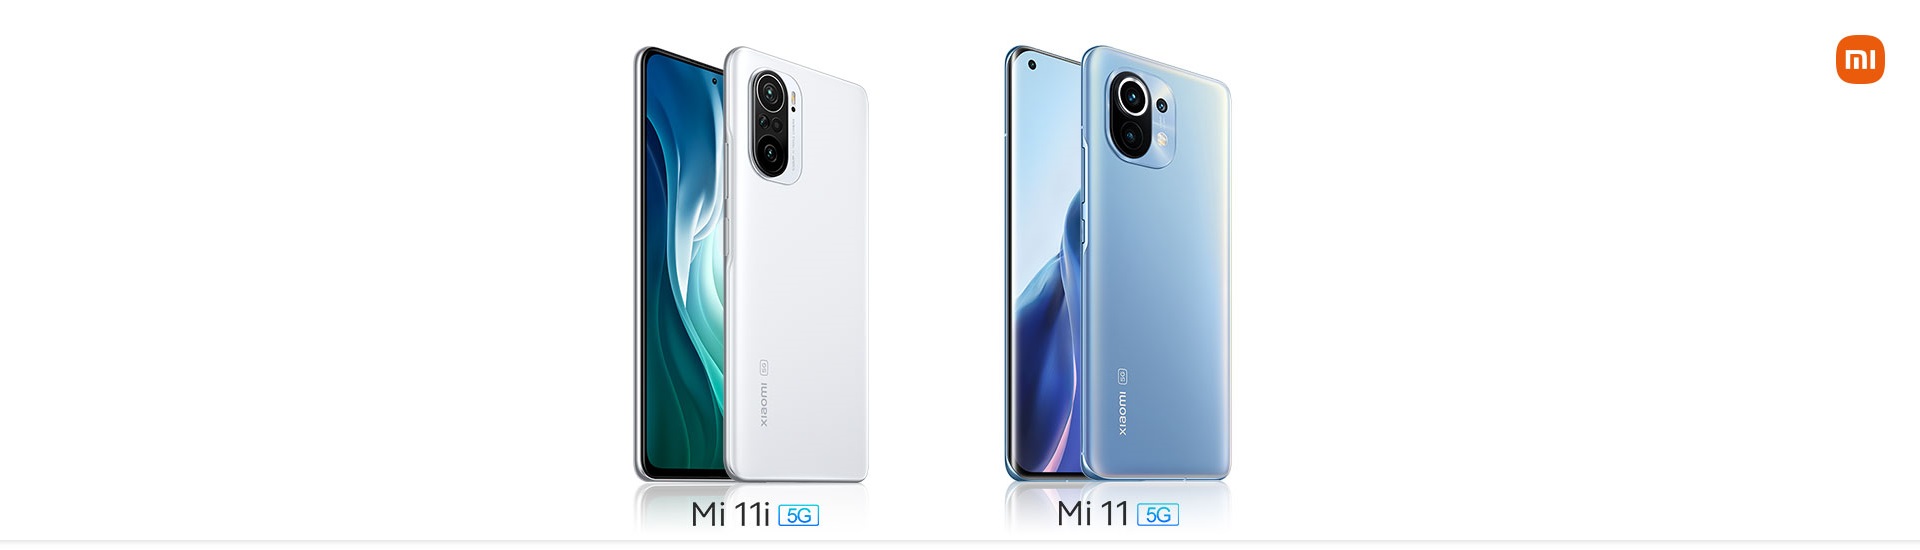 Mi 11 series 5G add-on $225/mth up upon SIM Subscription/contract renewal